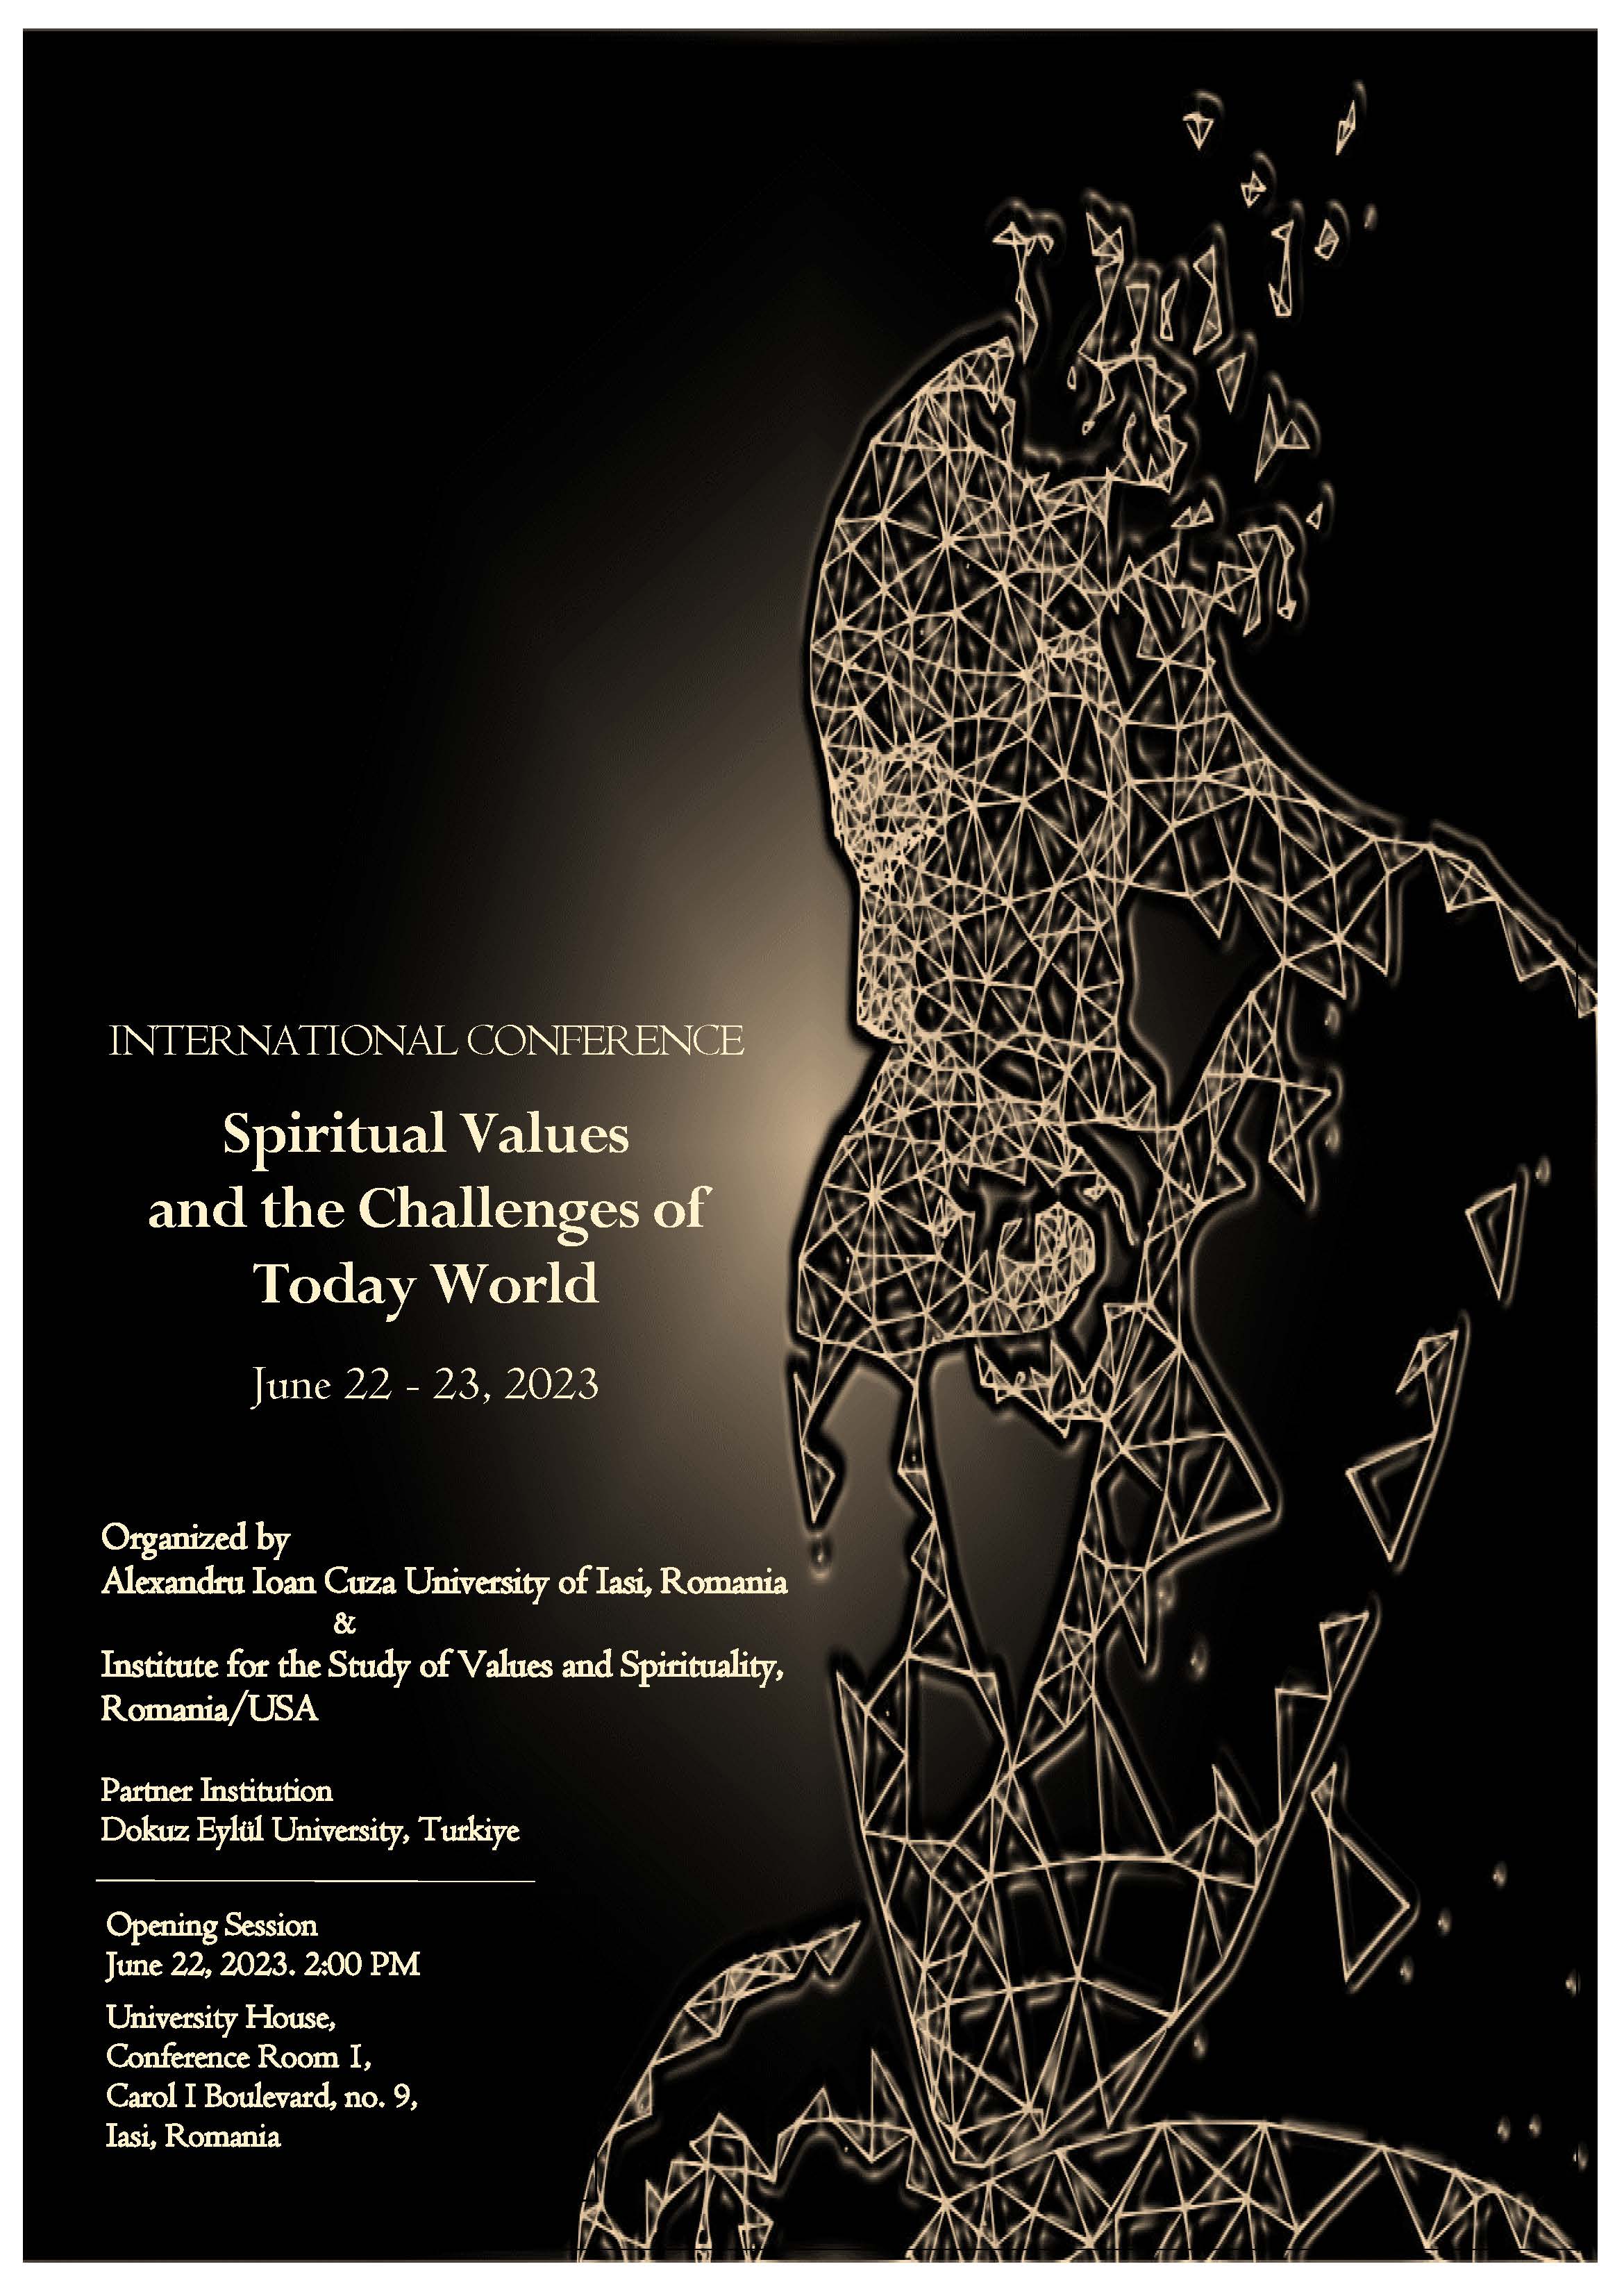 Spiritual Values and the Challenges of Today World